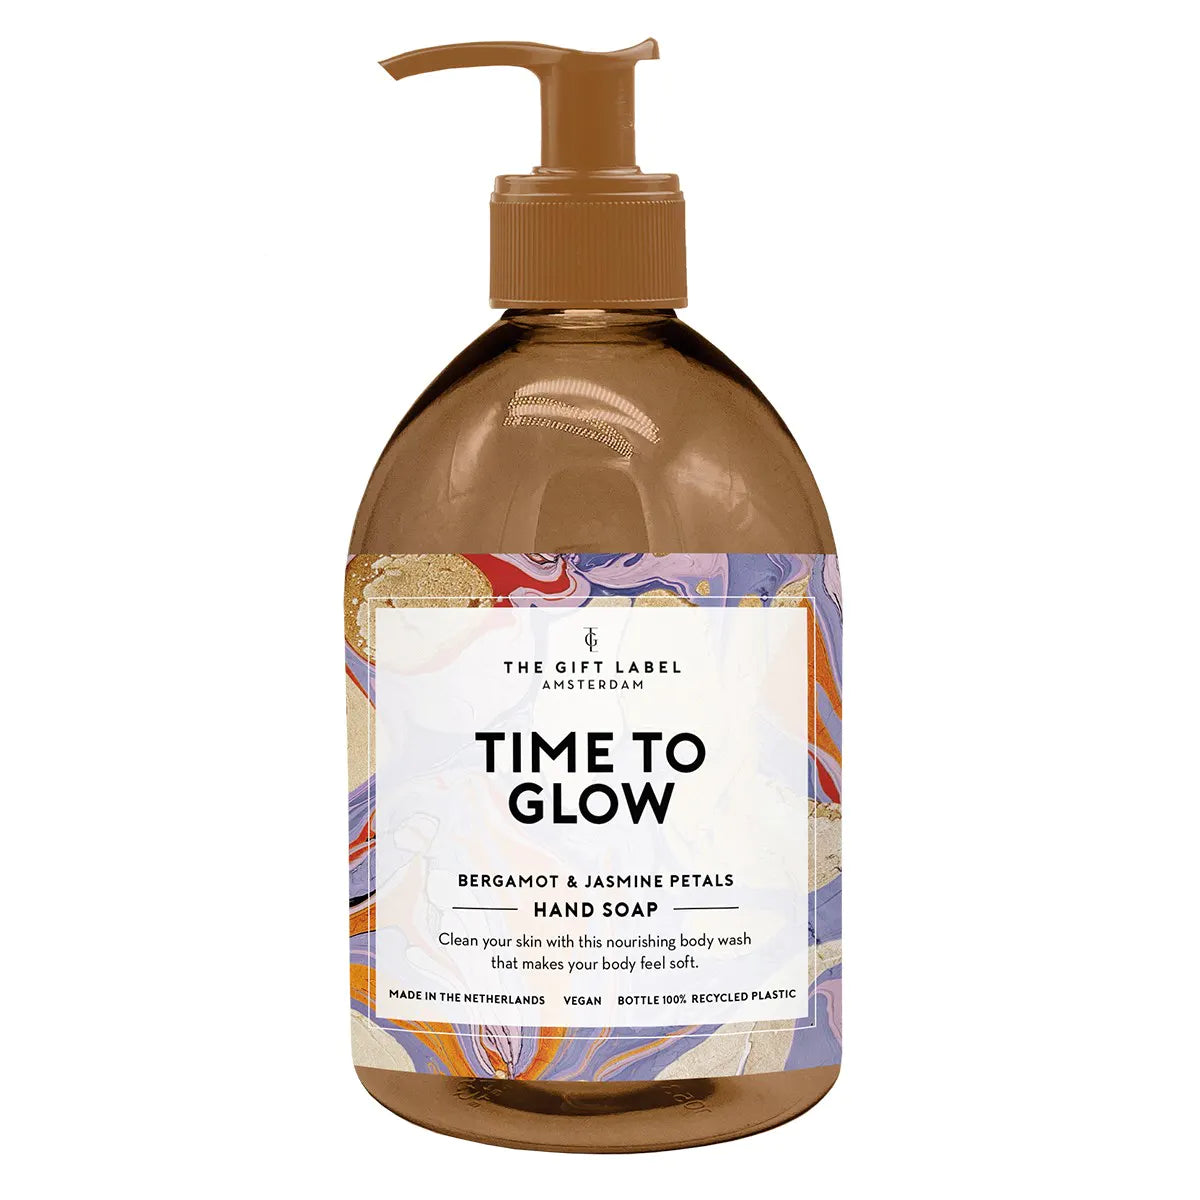 Hand Soap 200ml - Time To Glow